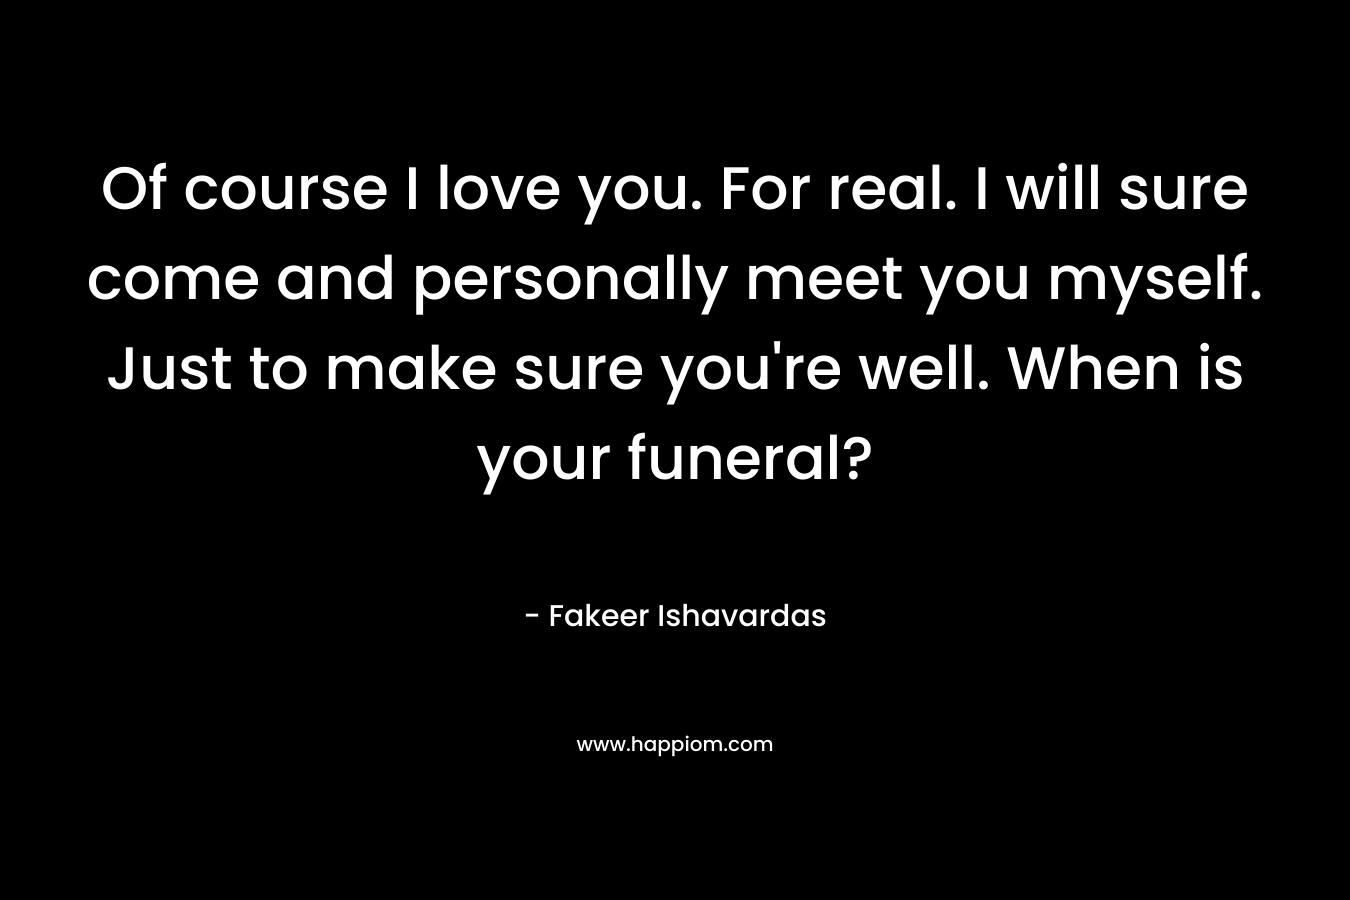 Of course I love you. For real. I will sure come and personally meet you myself. Just to make sure you're well. When is your funeral?